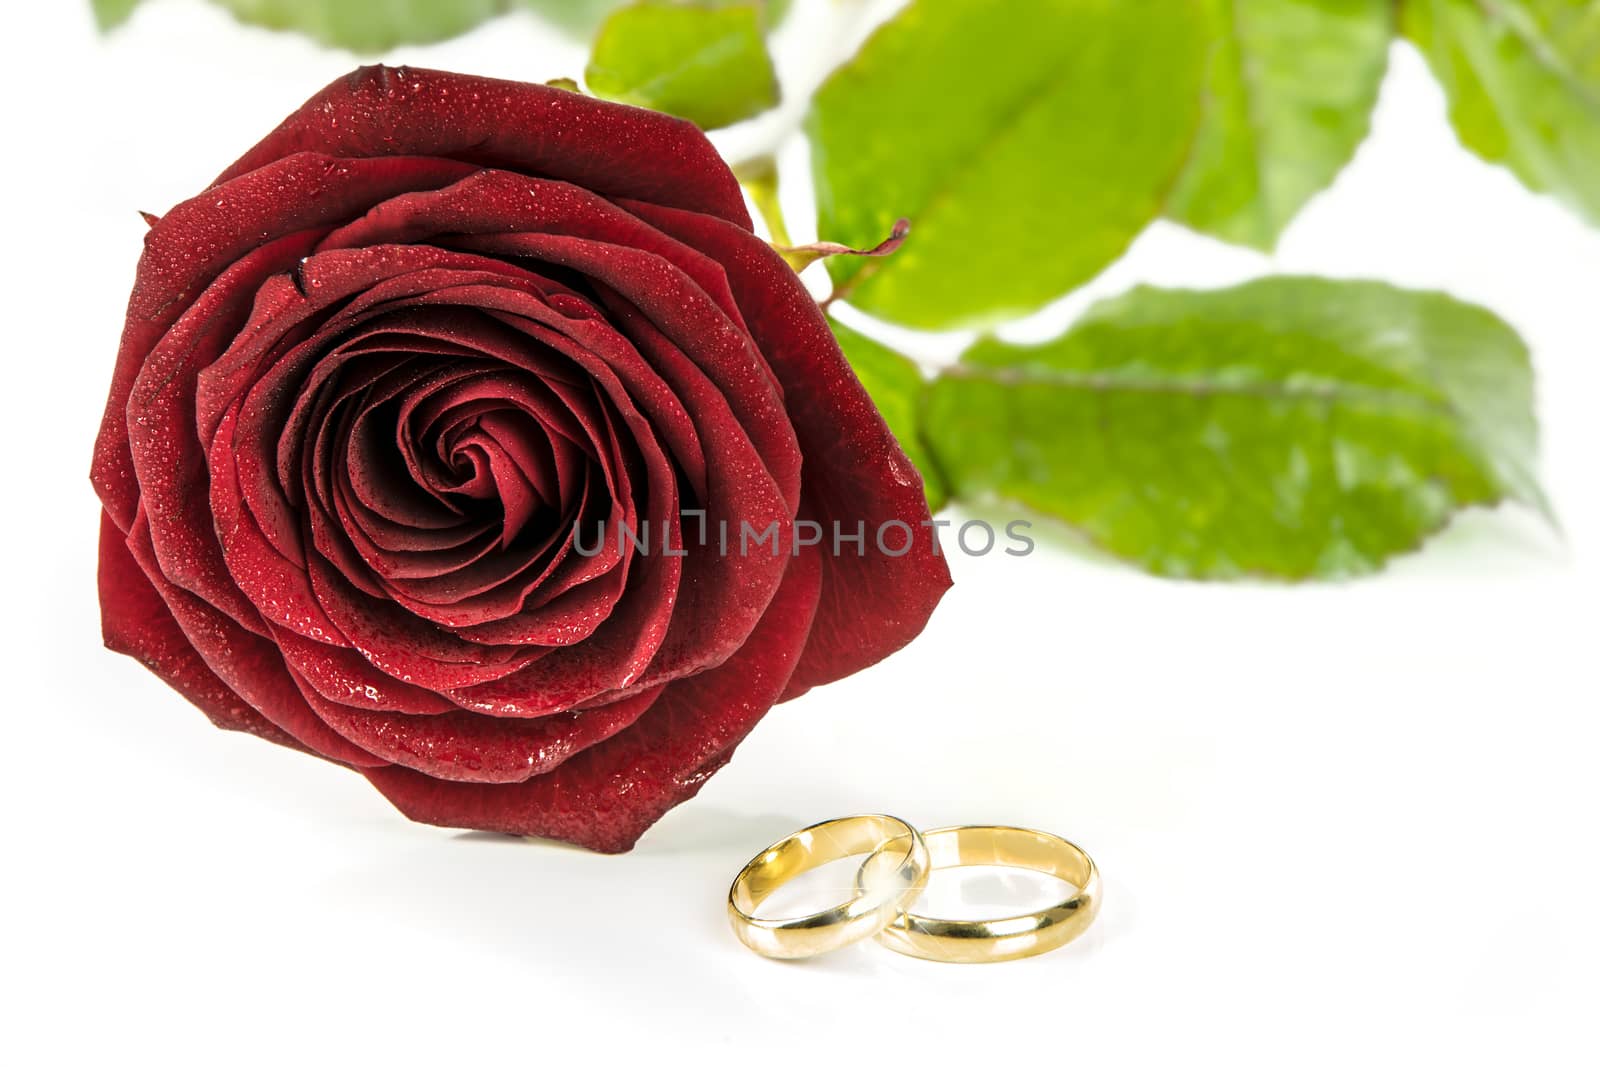 Red rose and two wedding rings by wdnet_studio